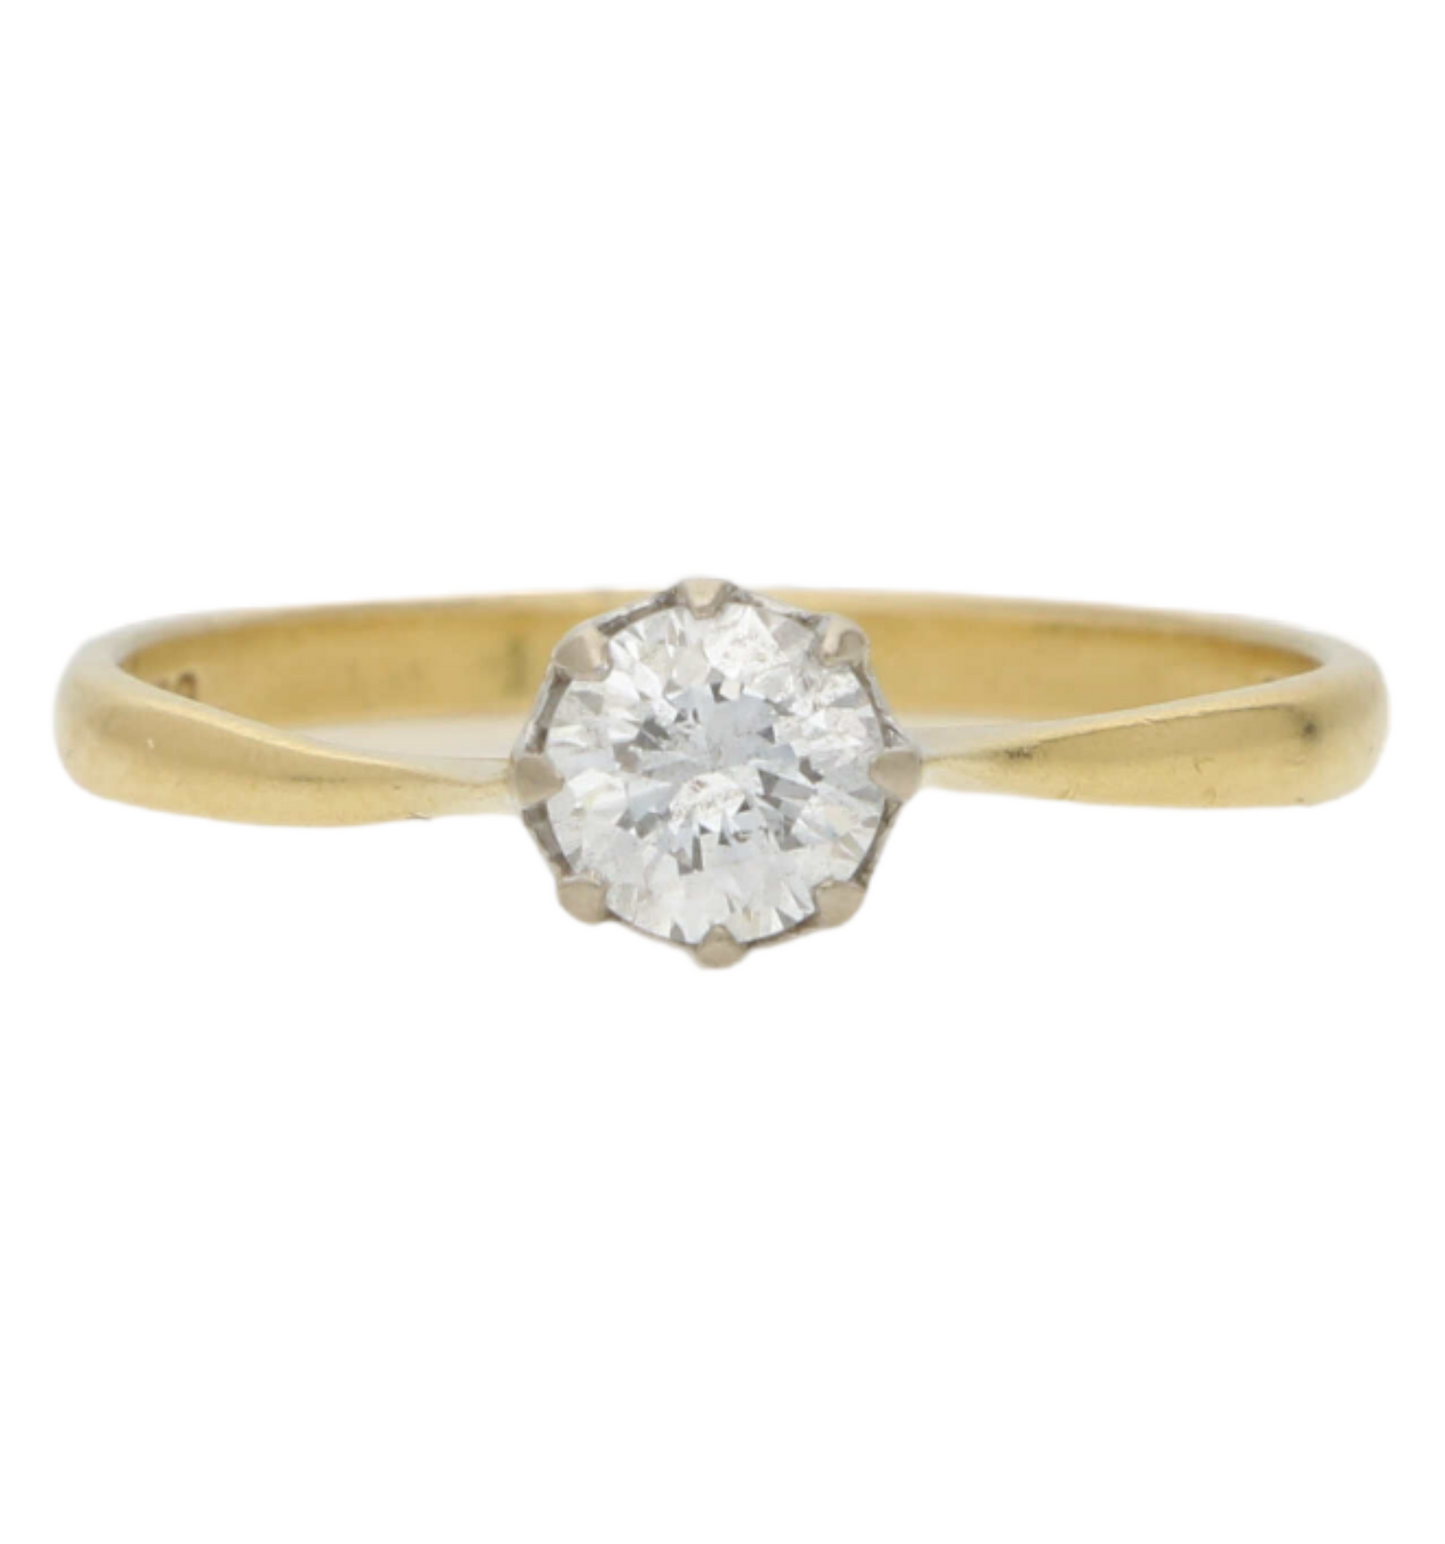 18ct diamond solitaire engagement ring